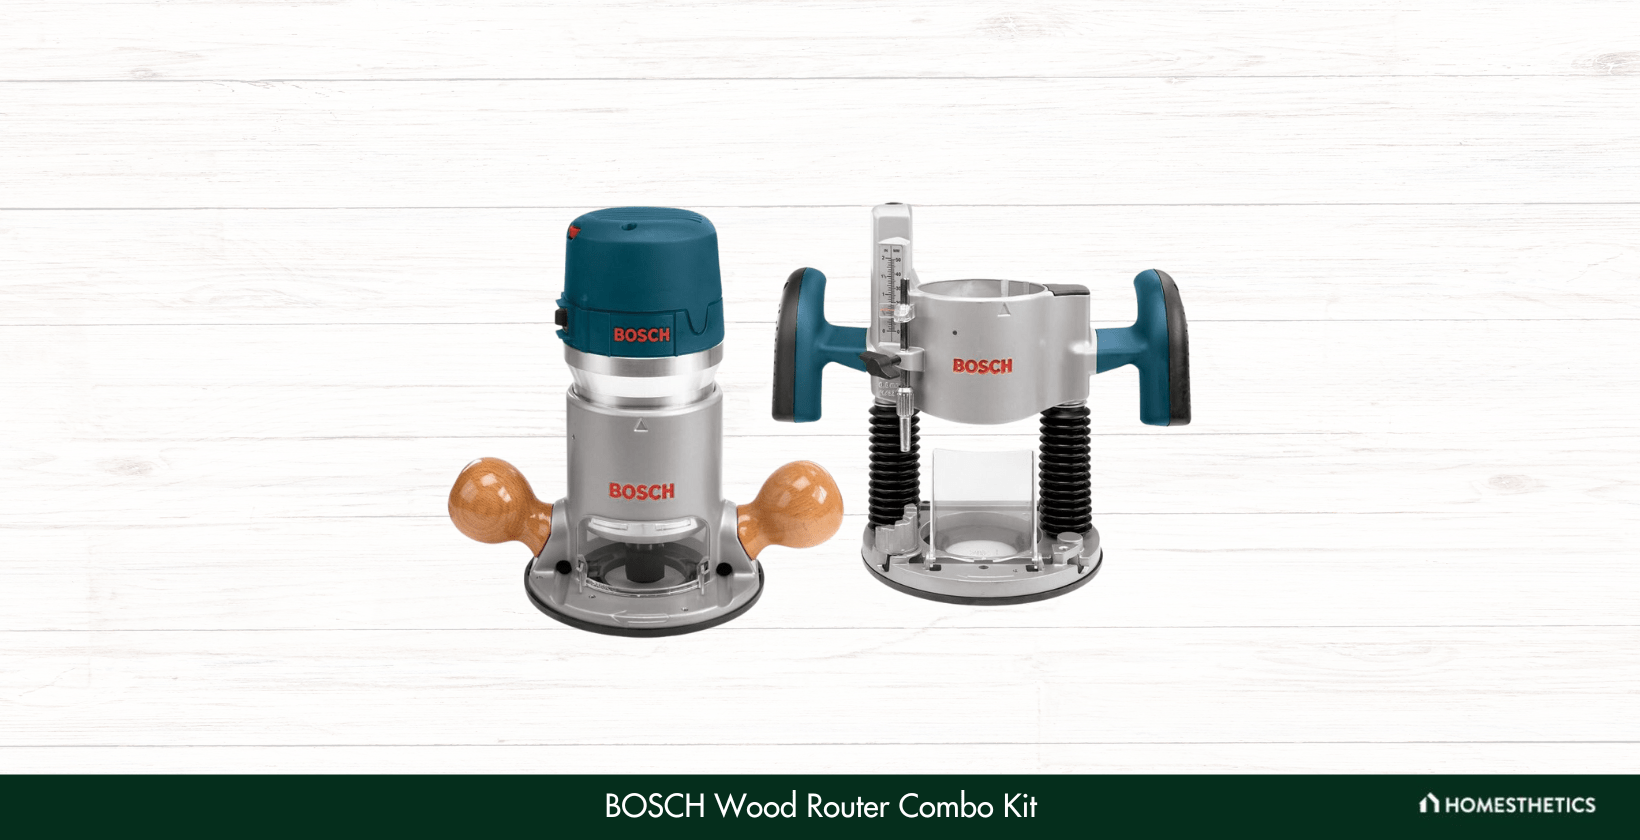 1. BOSCH Wood Router Combo Kit